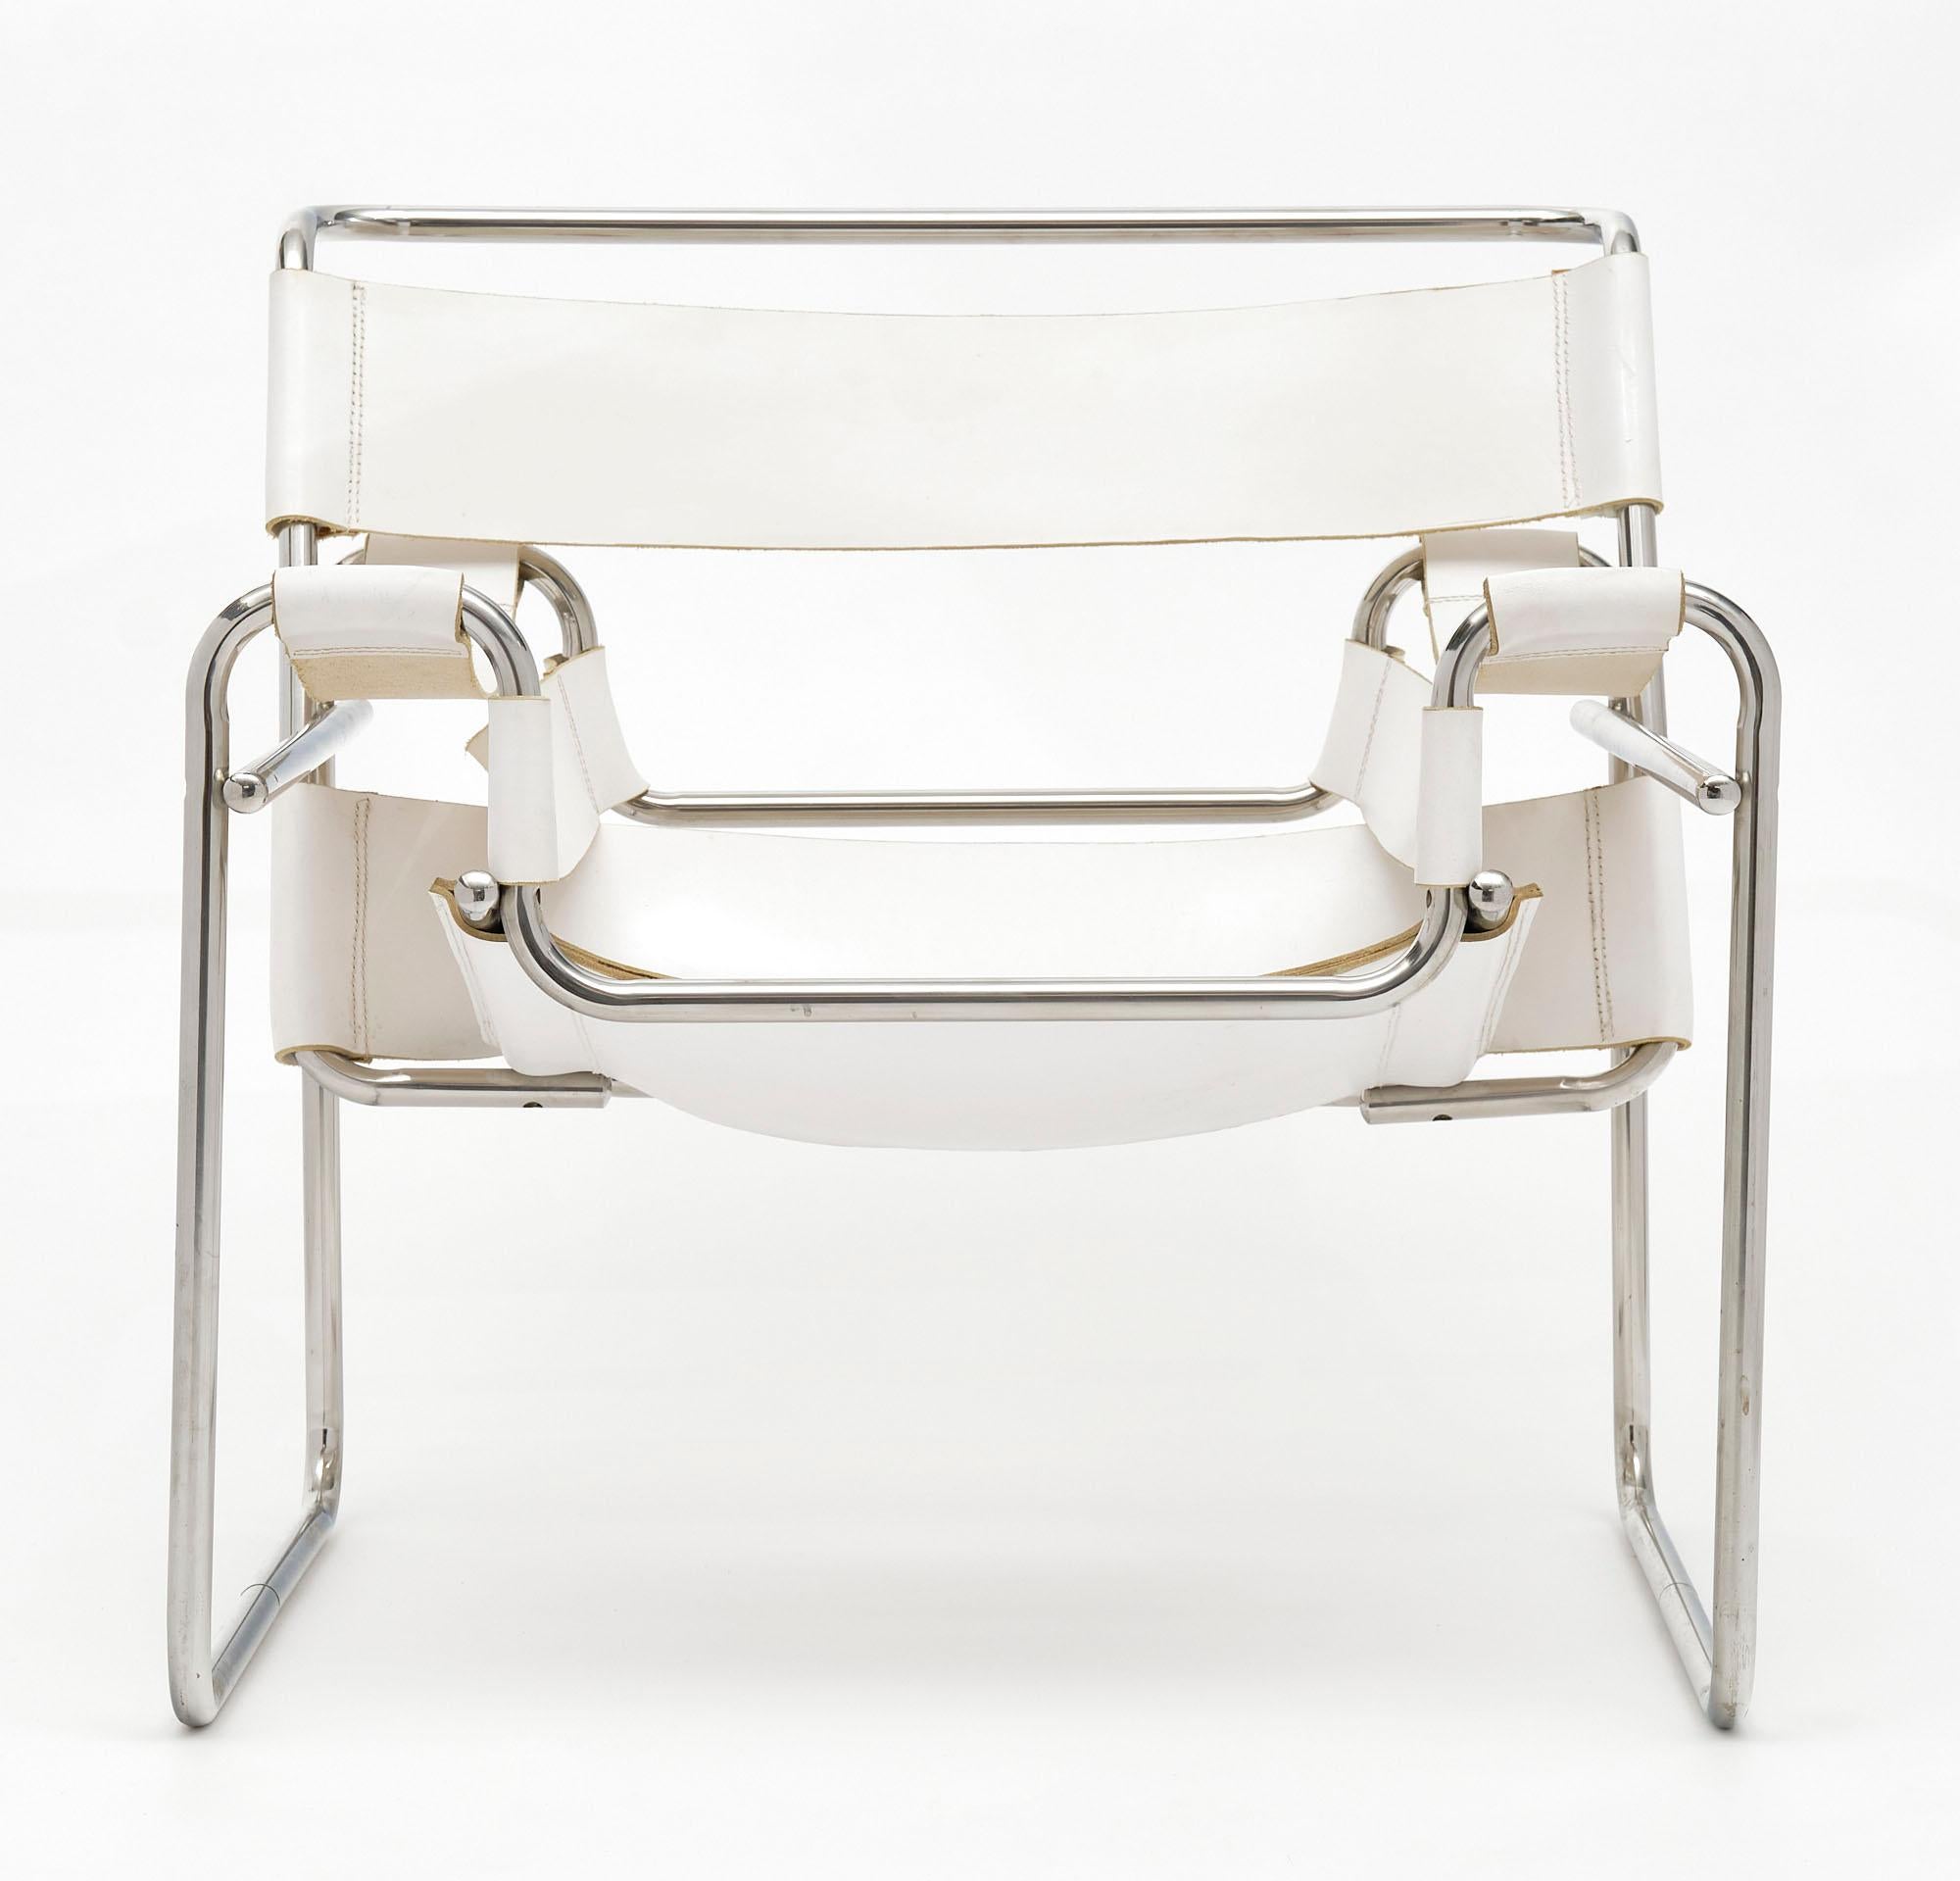 Armchair in the manner of Marcel Breuer’s famous Wassily design. This chair is made of white leather and chromed steel in the iconic chair design.